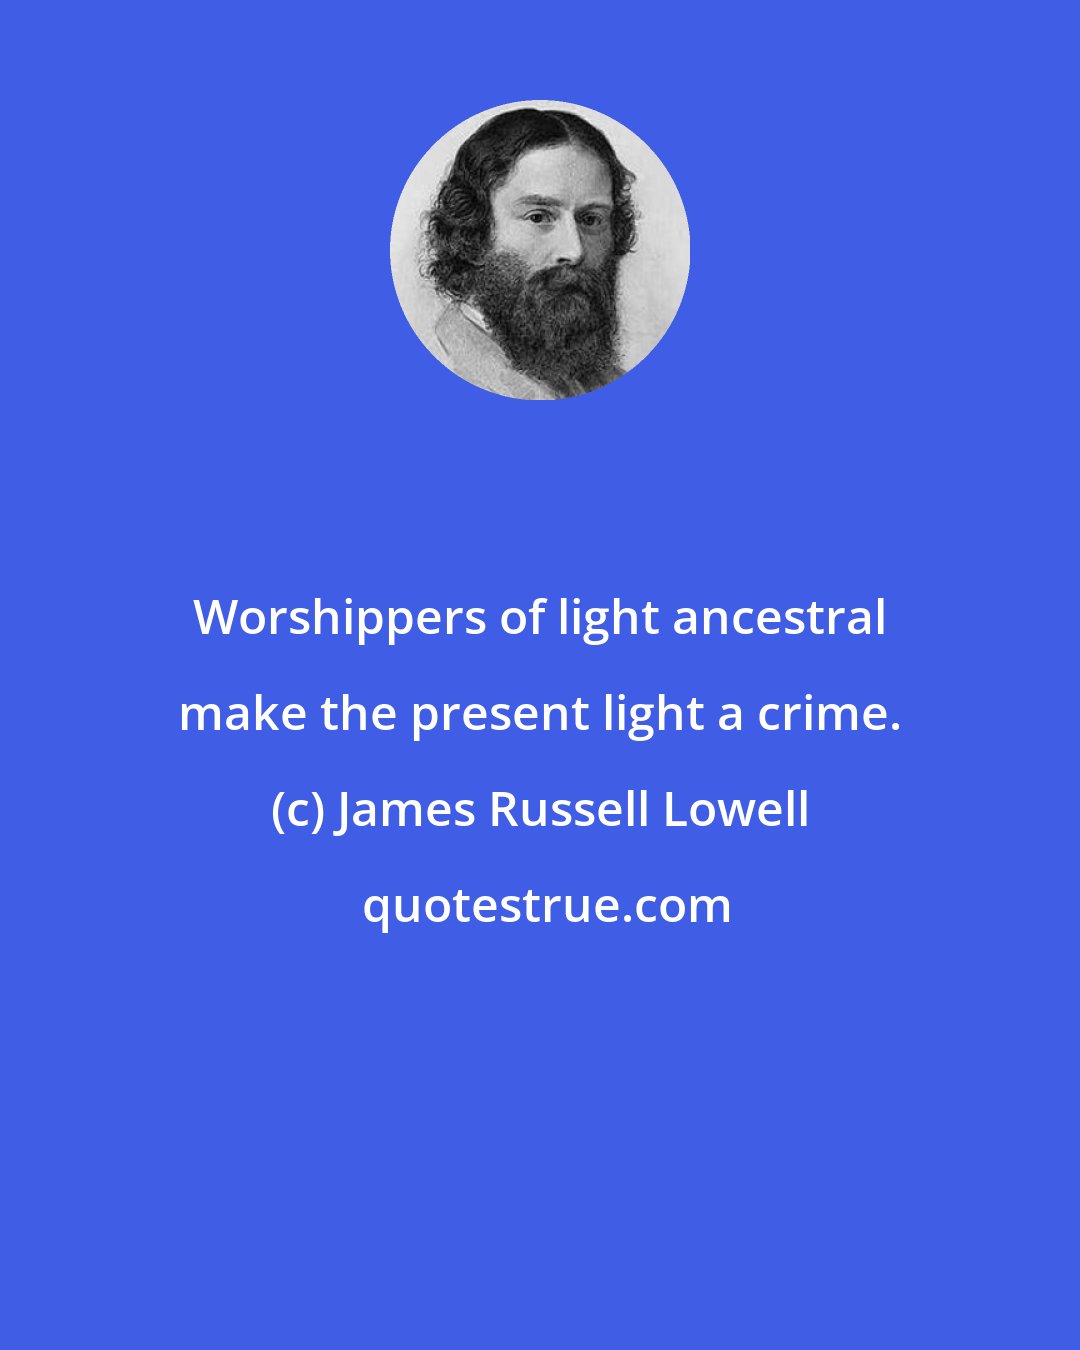 James Russell Lowell: Worshippers of light ancestral make the present light a crime.